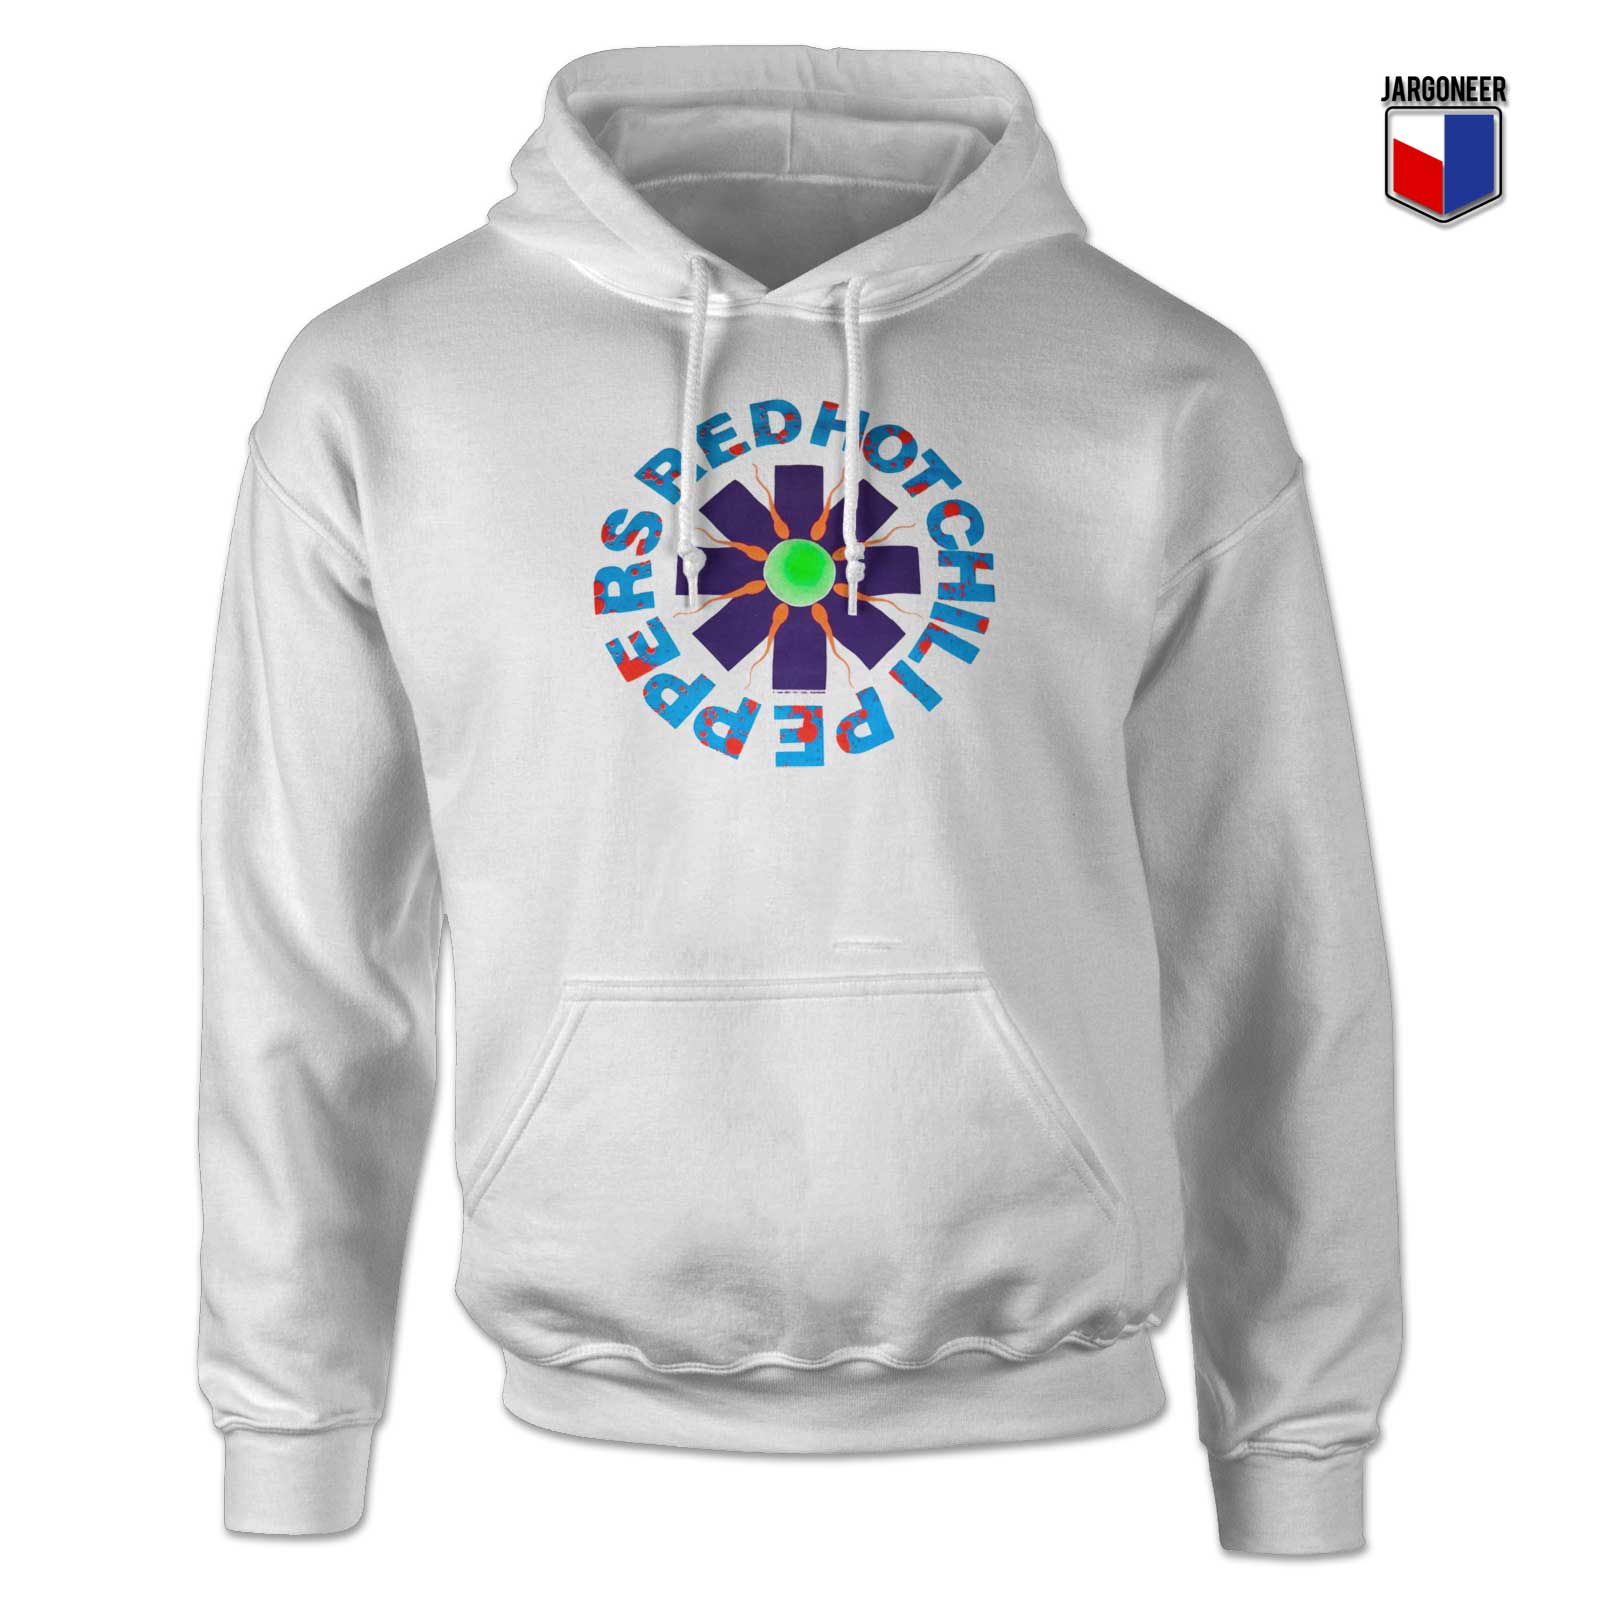 Red hot Chili Peppers Hoodie - Shop Unique Graphic Cool Shirt Designs